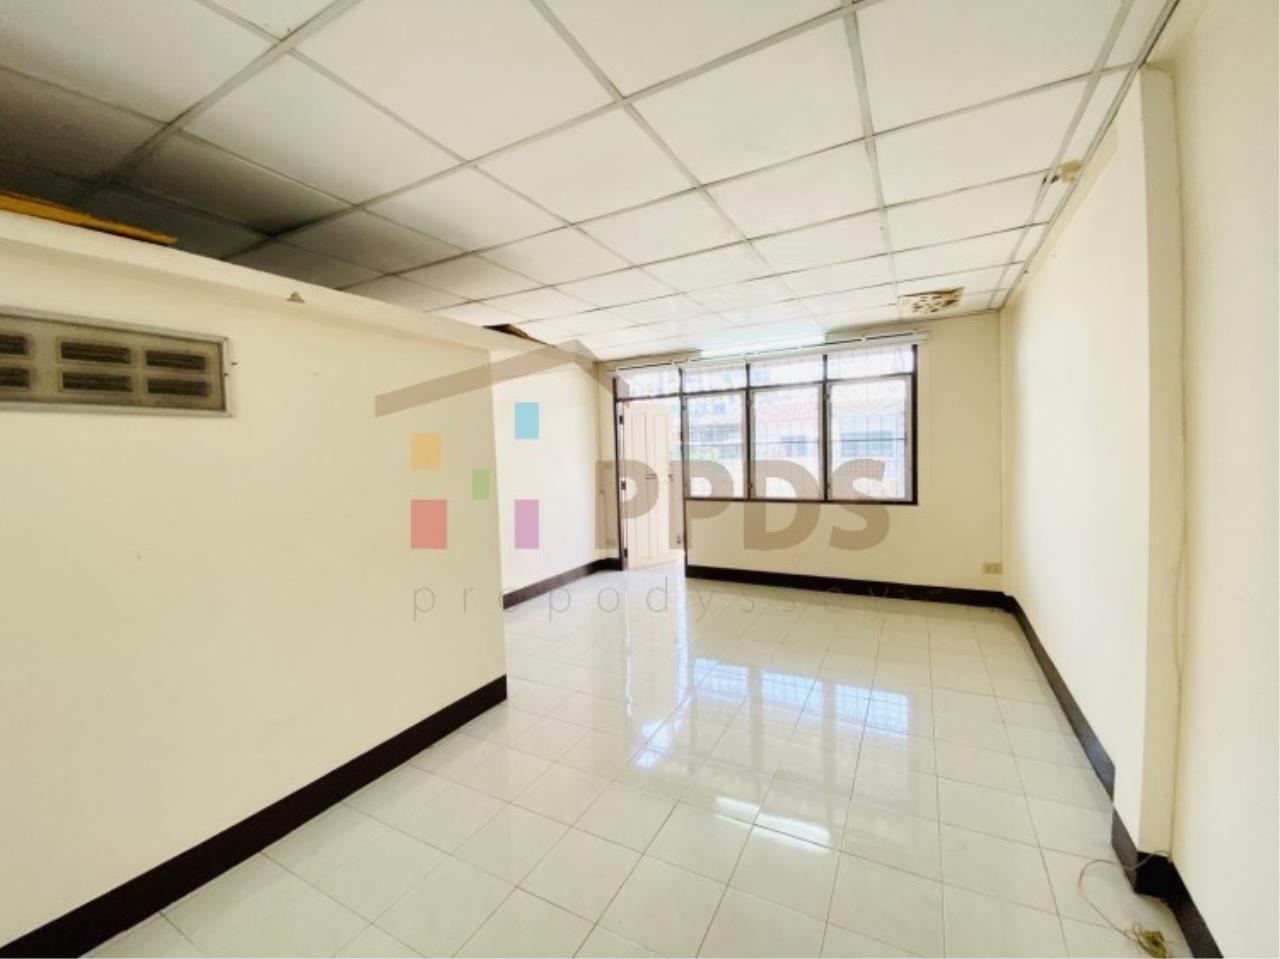 For sale an old townhouse with great location Sukhumvit 65 Chaiyapruk, ภาพที่ 4